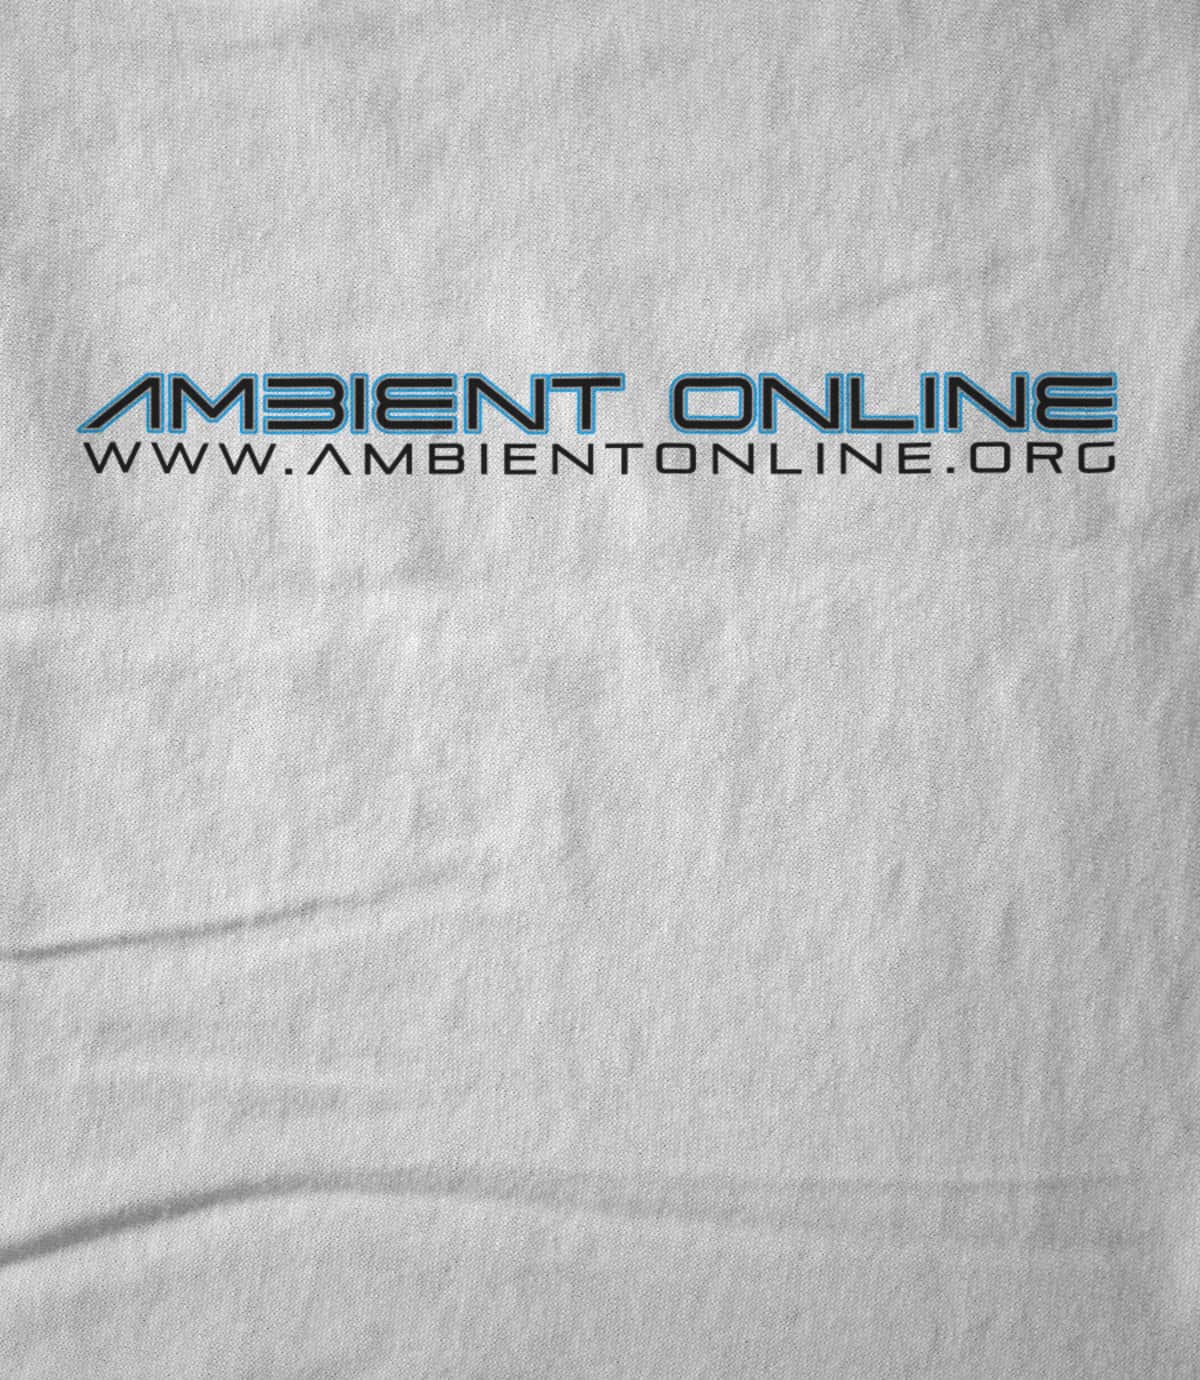 Ambient online ao main logo new 1576264540